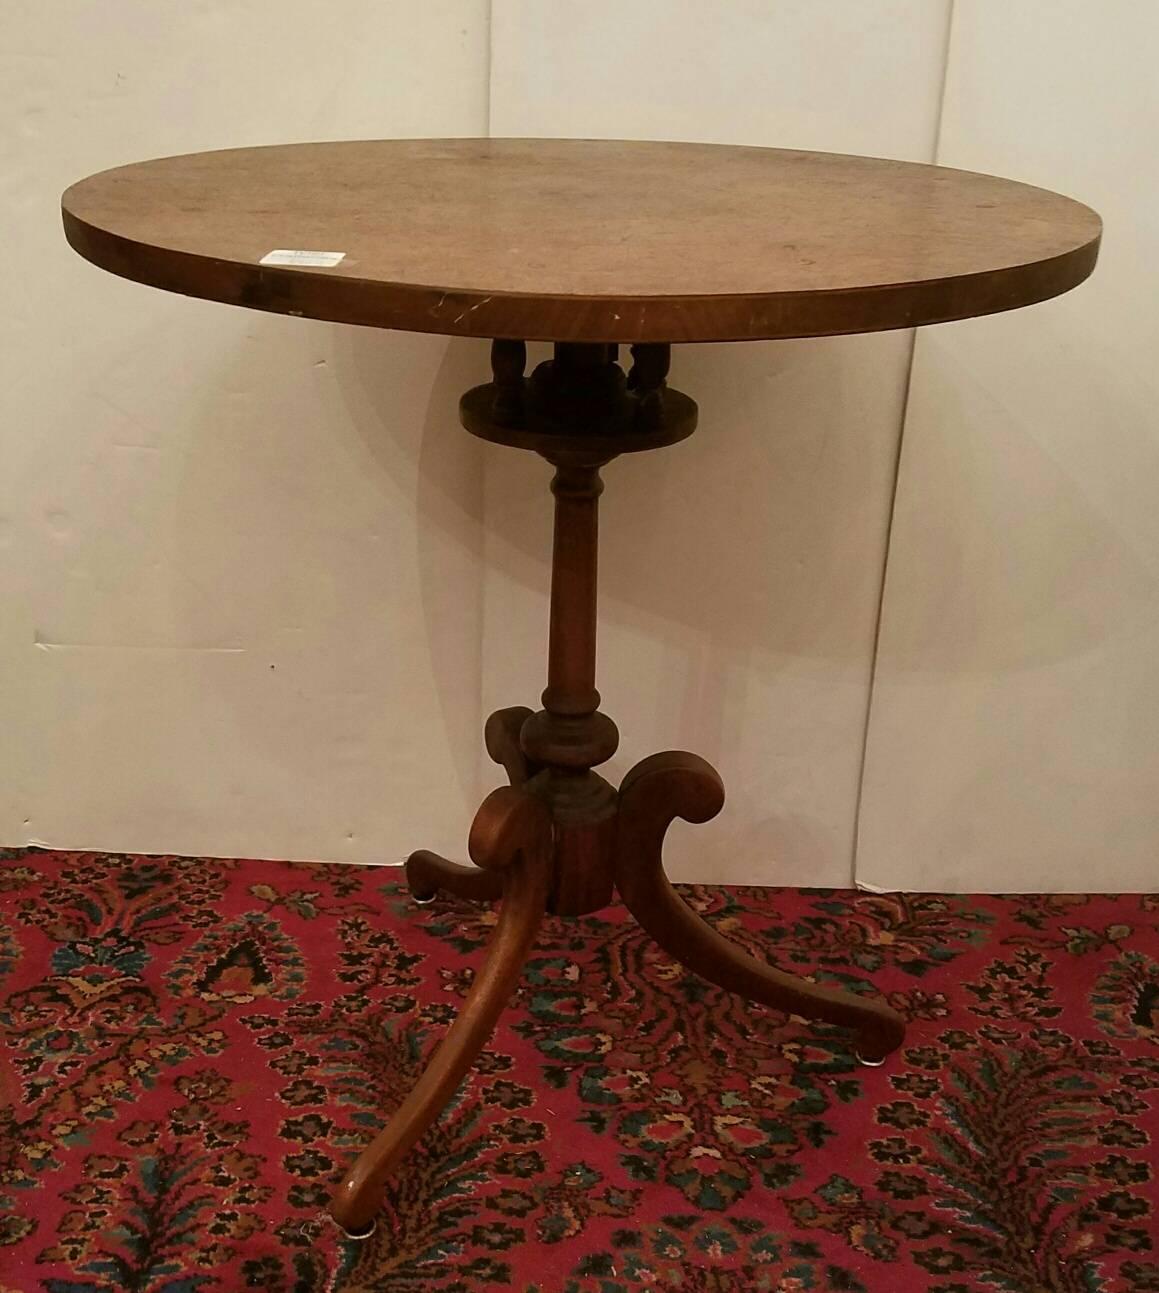 Pair of revolving top tables; walnut tops on a mahogany standard and legs.